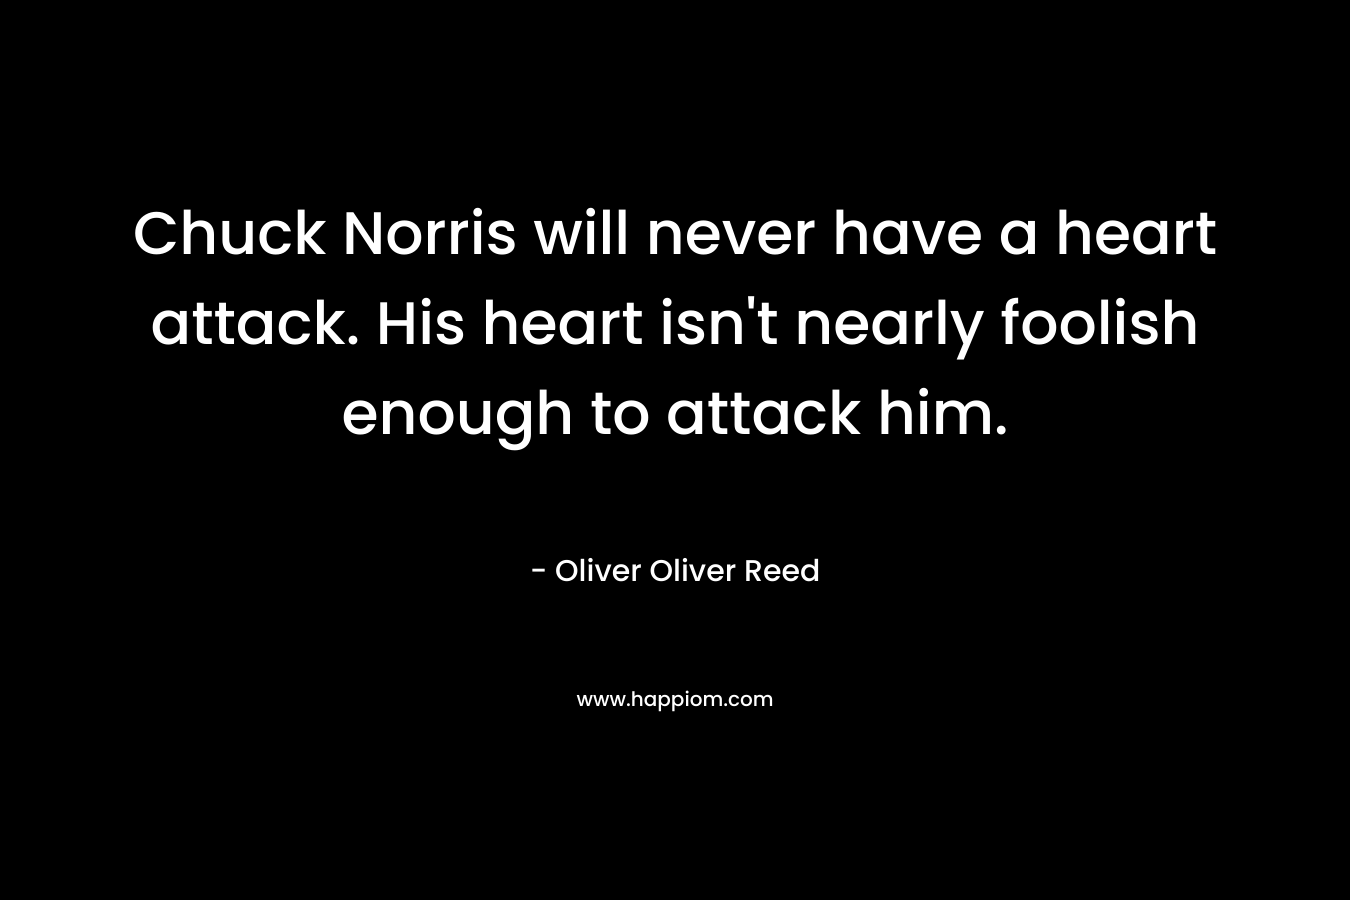 Chuck Norris will never have a heart attack. His heart isn’t nearly foolish enough to attack him. – Oliver Oliver Reed